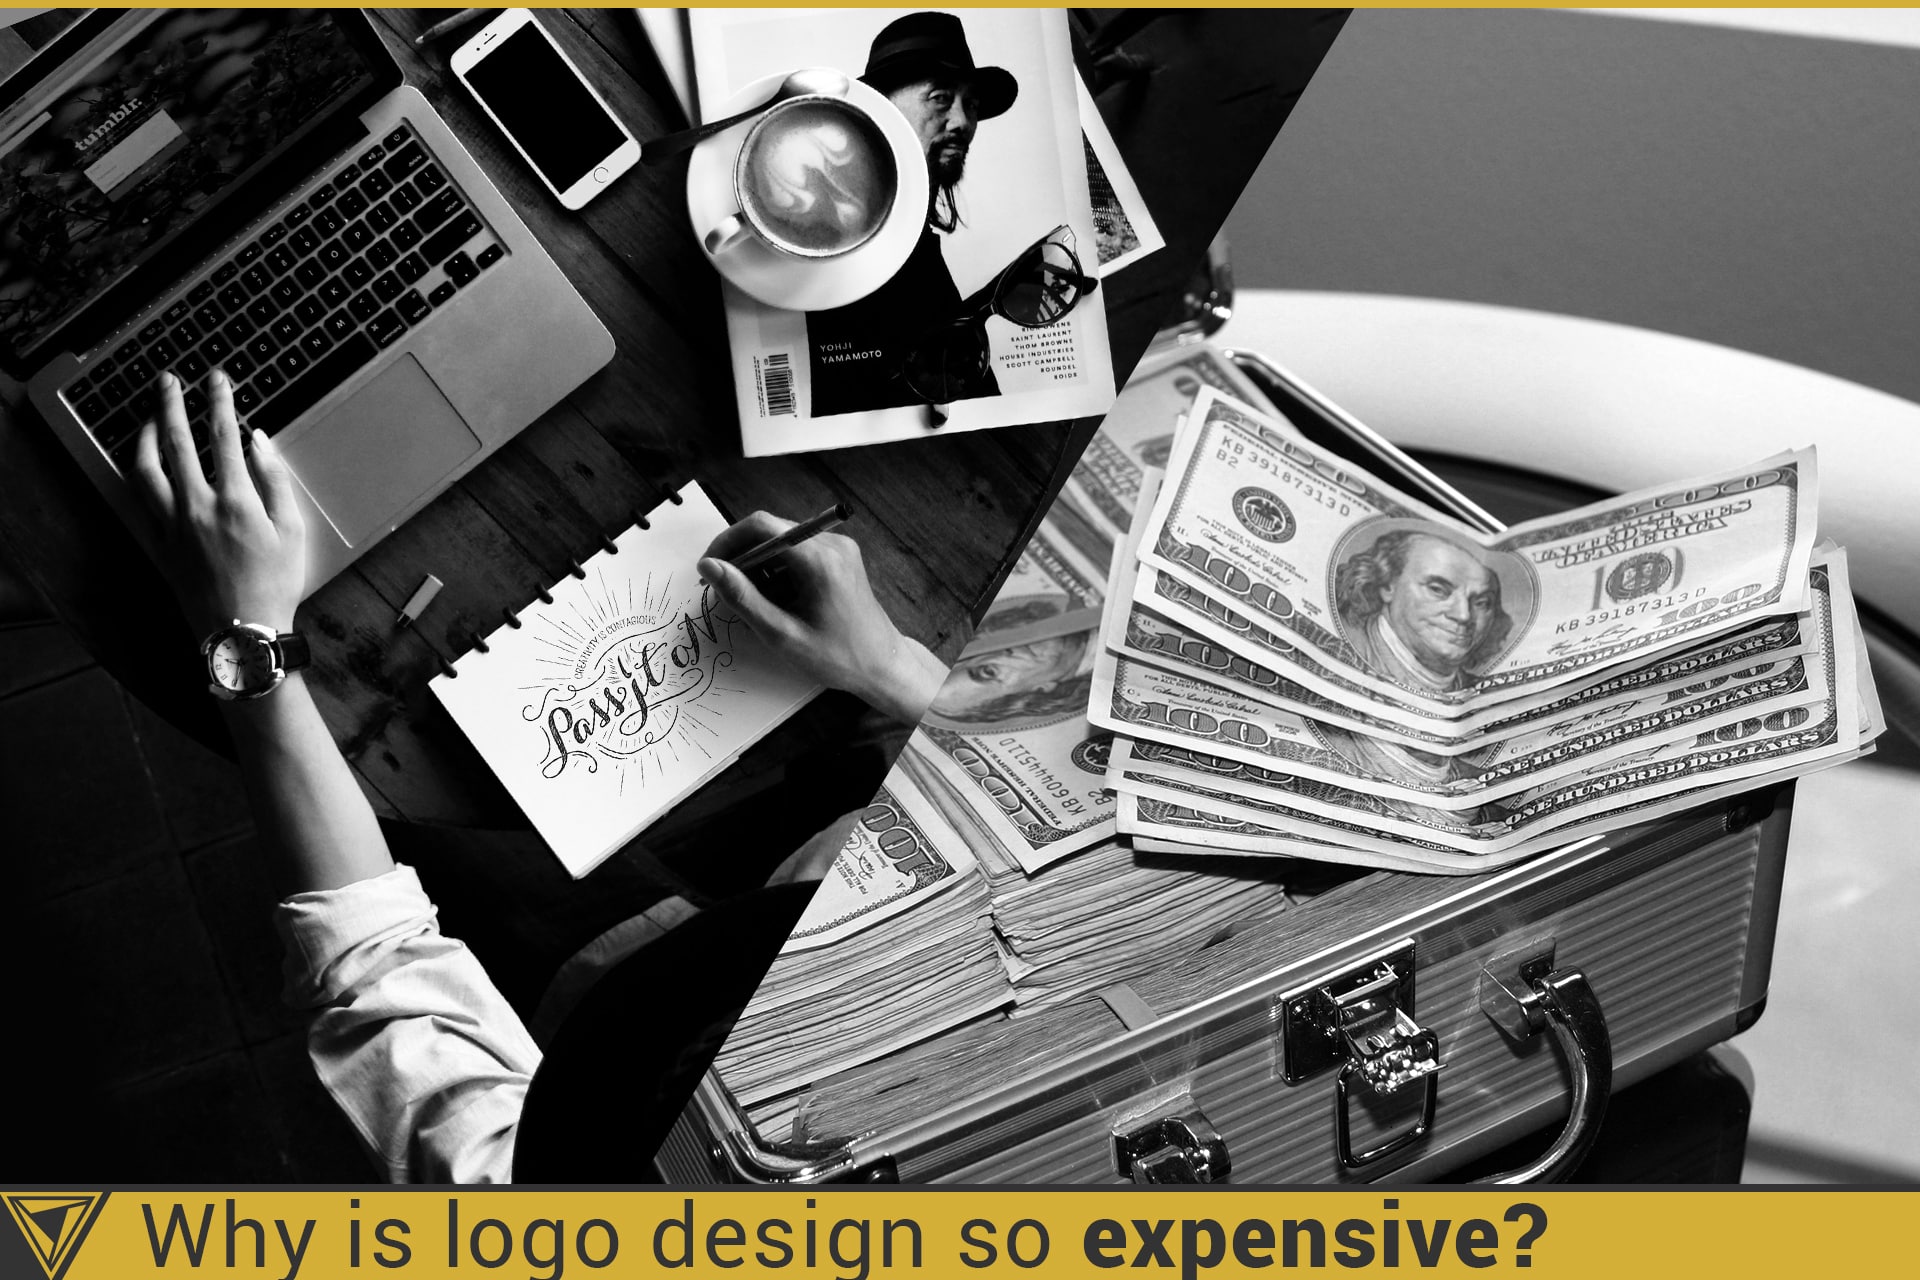 Why does professional logo design cost so much?